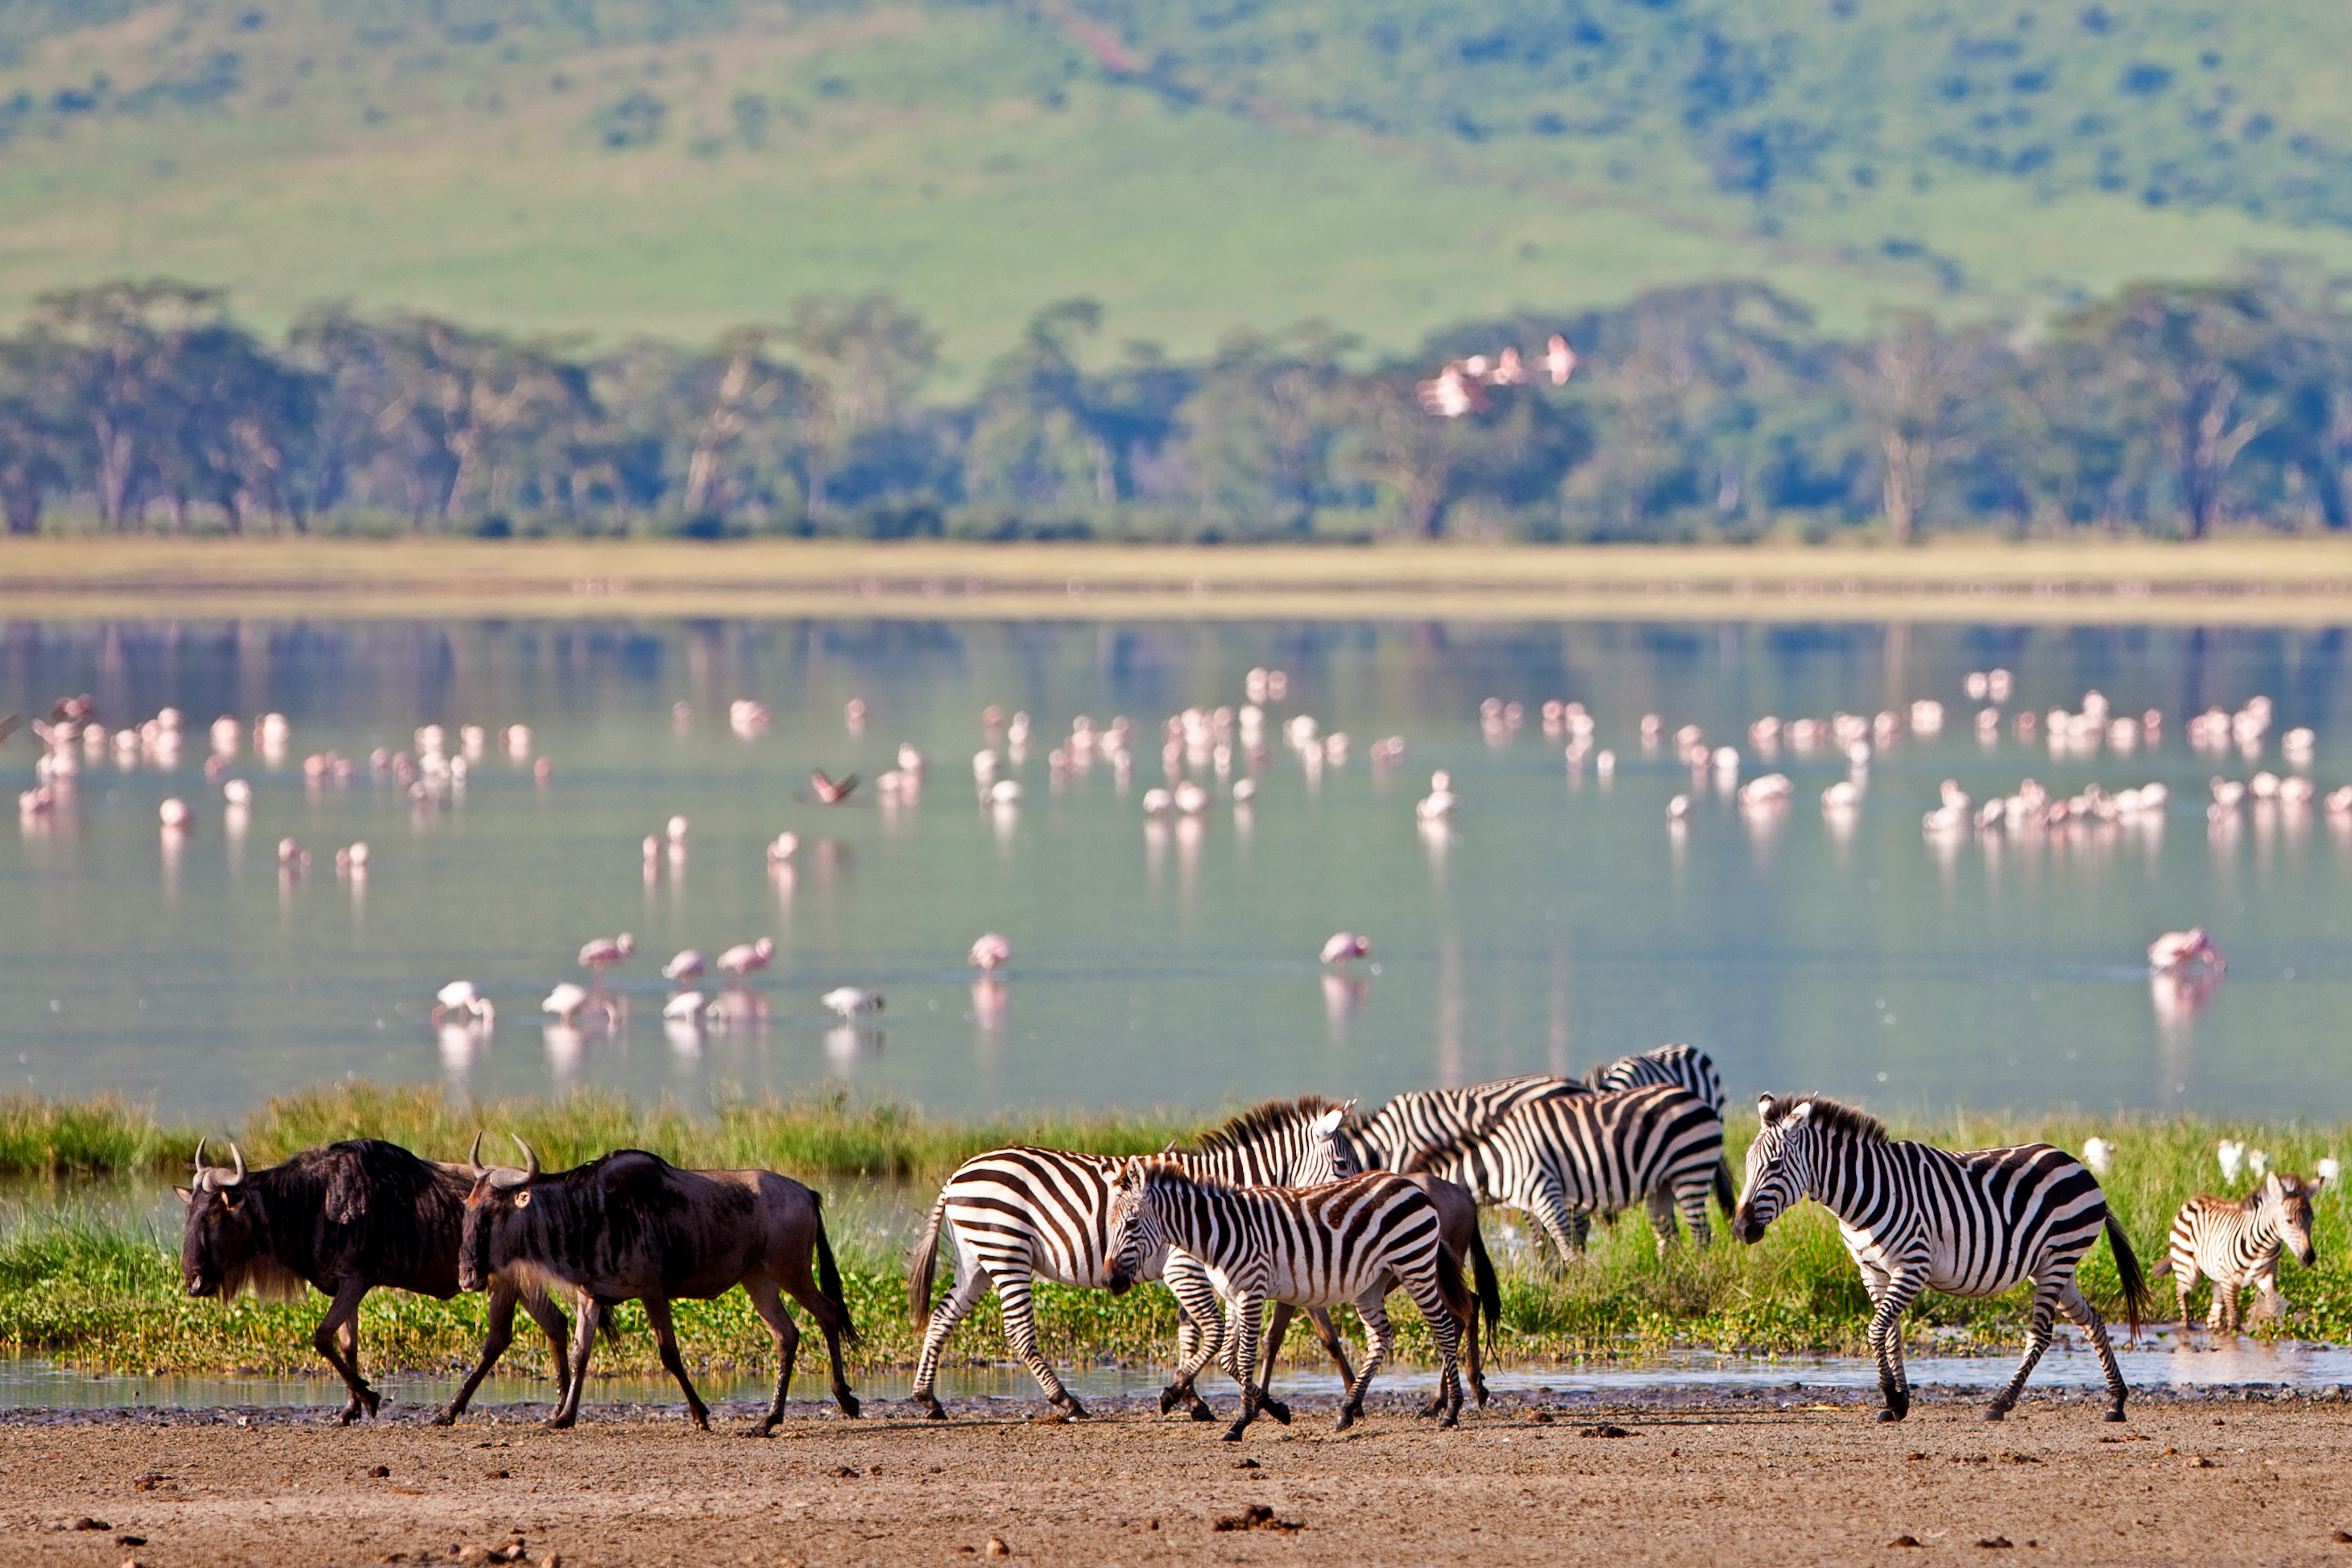 Visit These Epic Gorgeous African Destinations During a Family Vacation - Wildlife Inside the Ngorongoro Crater